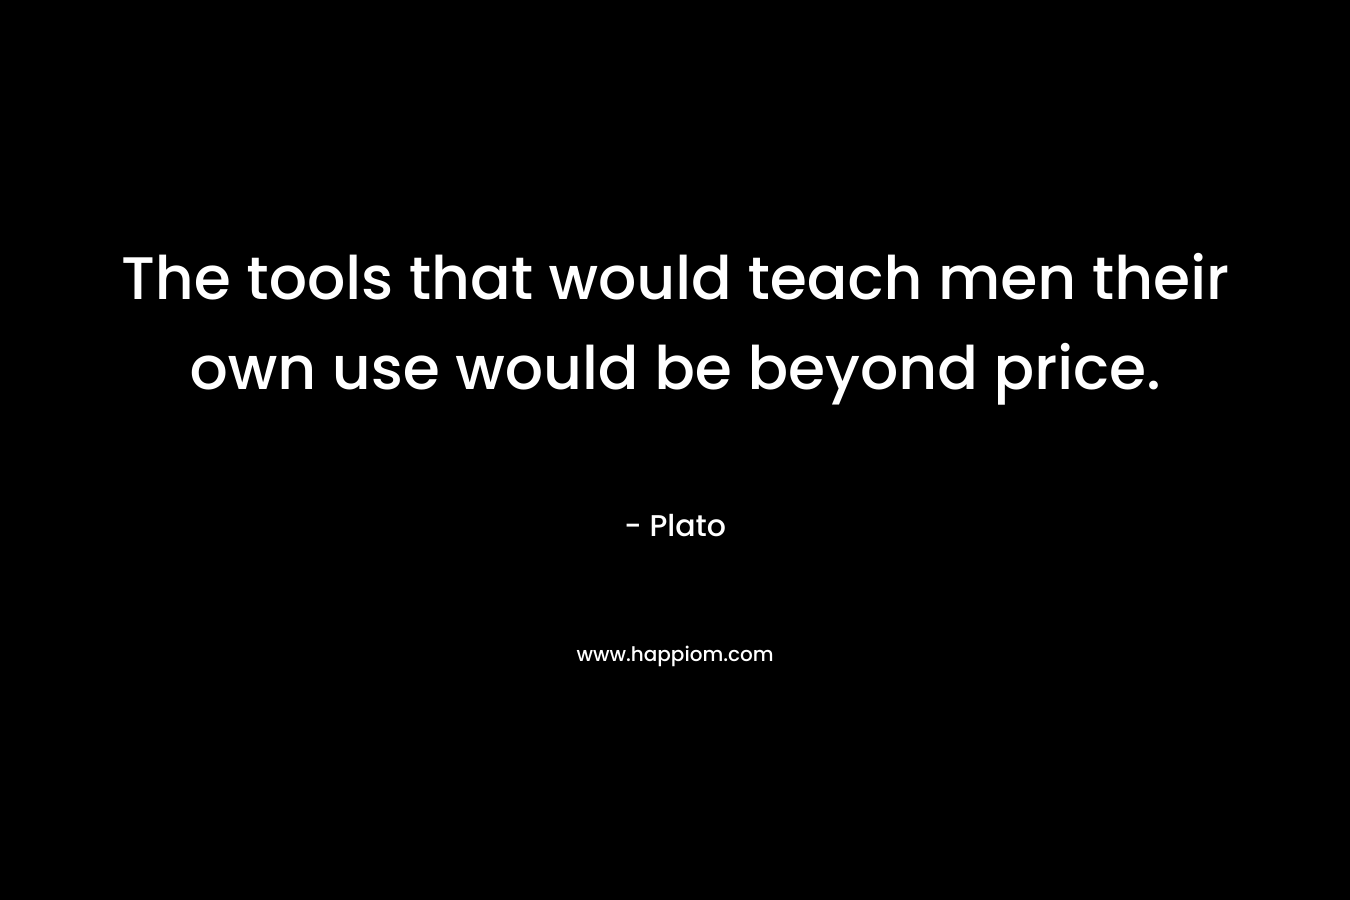 The tools that would teach men their own use would be beyond price.